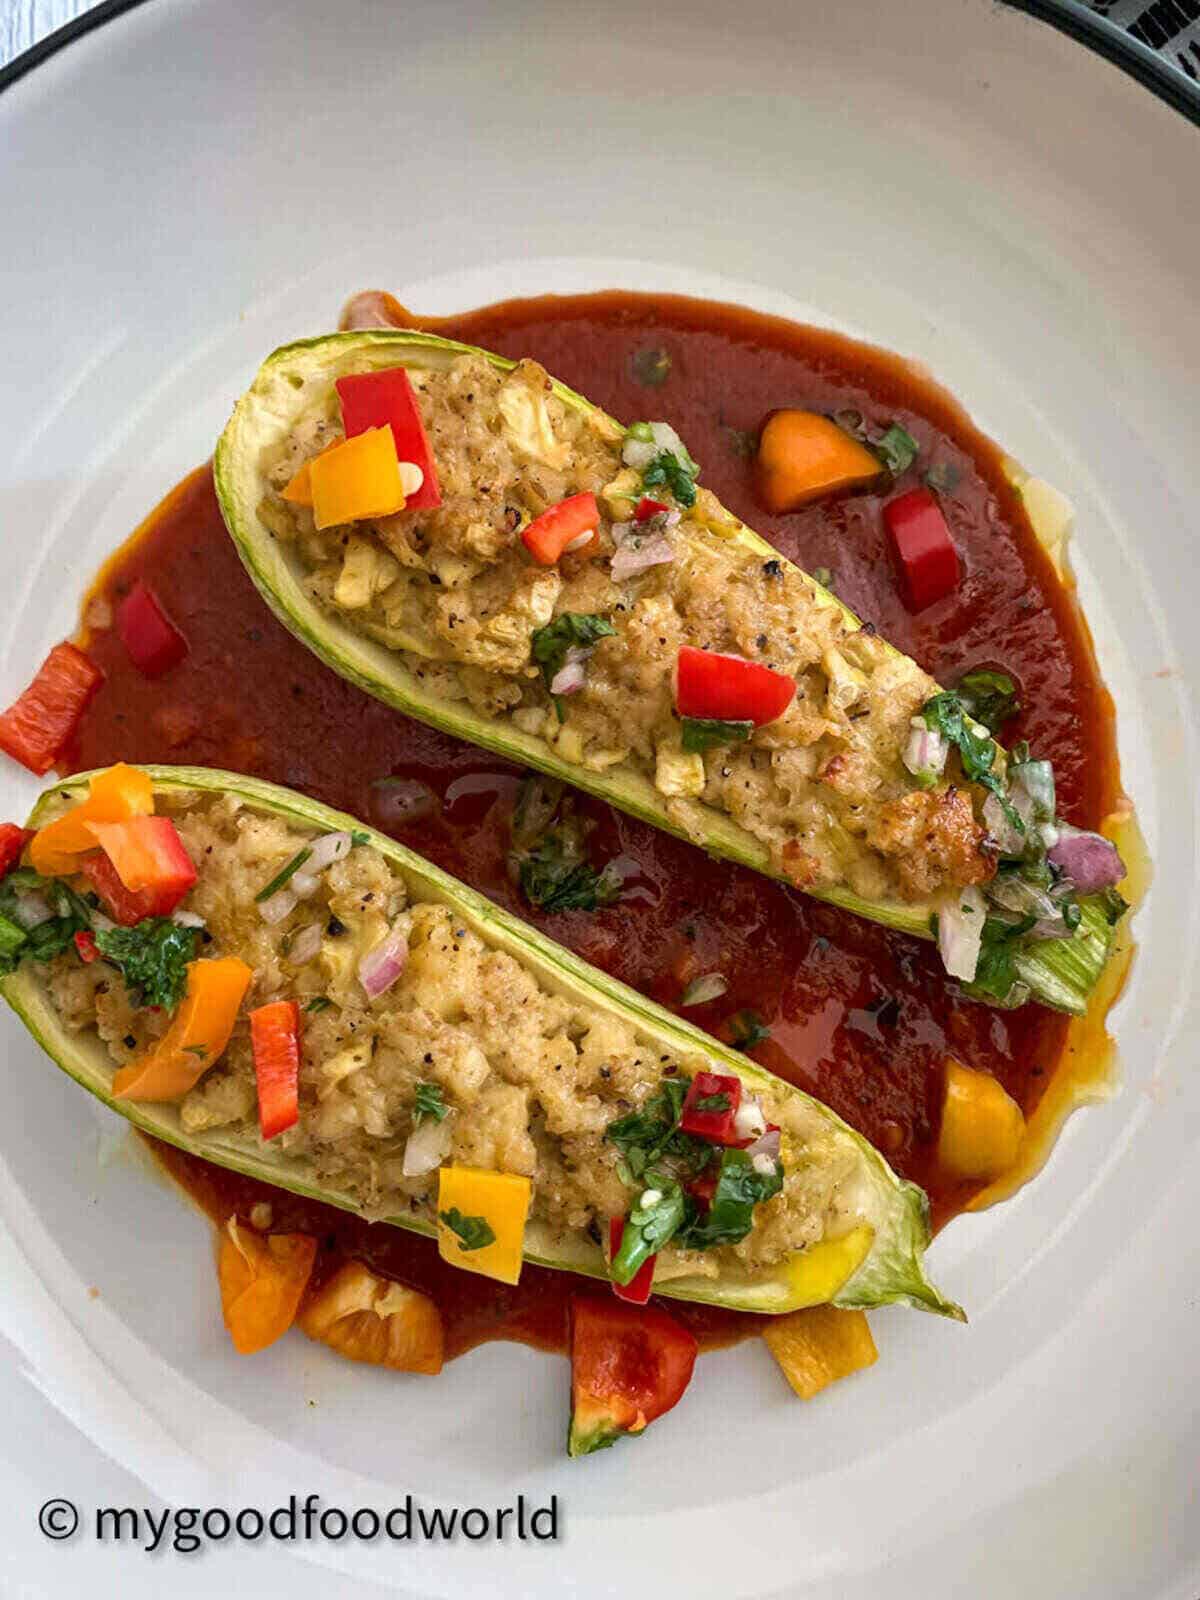 Vegetarian zucchini boats stuffed with scrambled paneer topped with cubes of colored peppers and placed on a bed of tomato sauce.